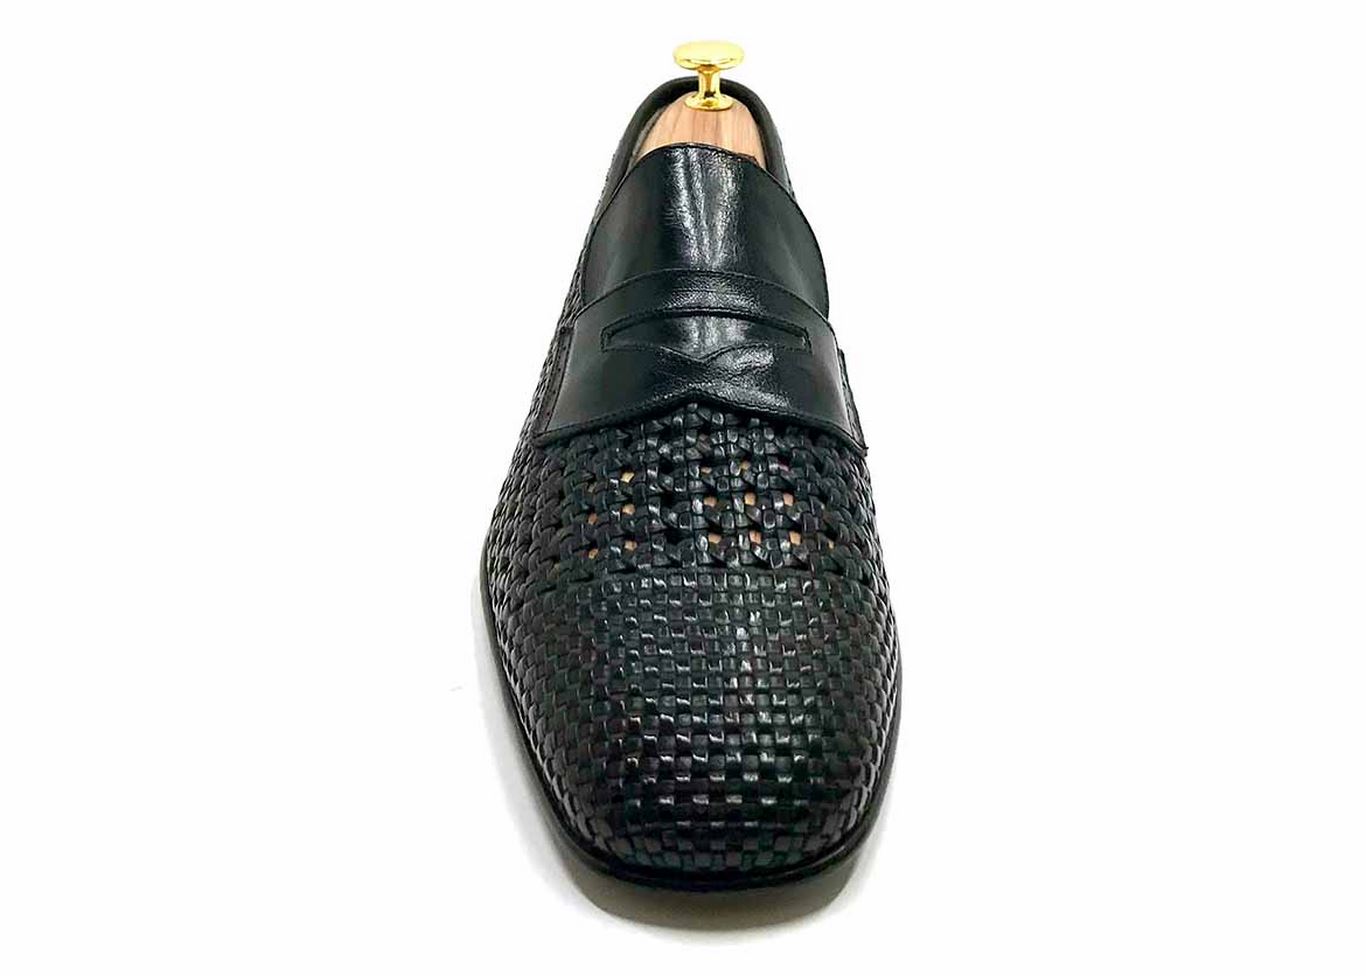 Comfort Loafer in Black woven leather